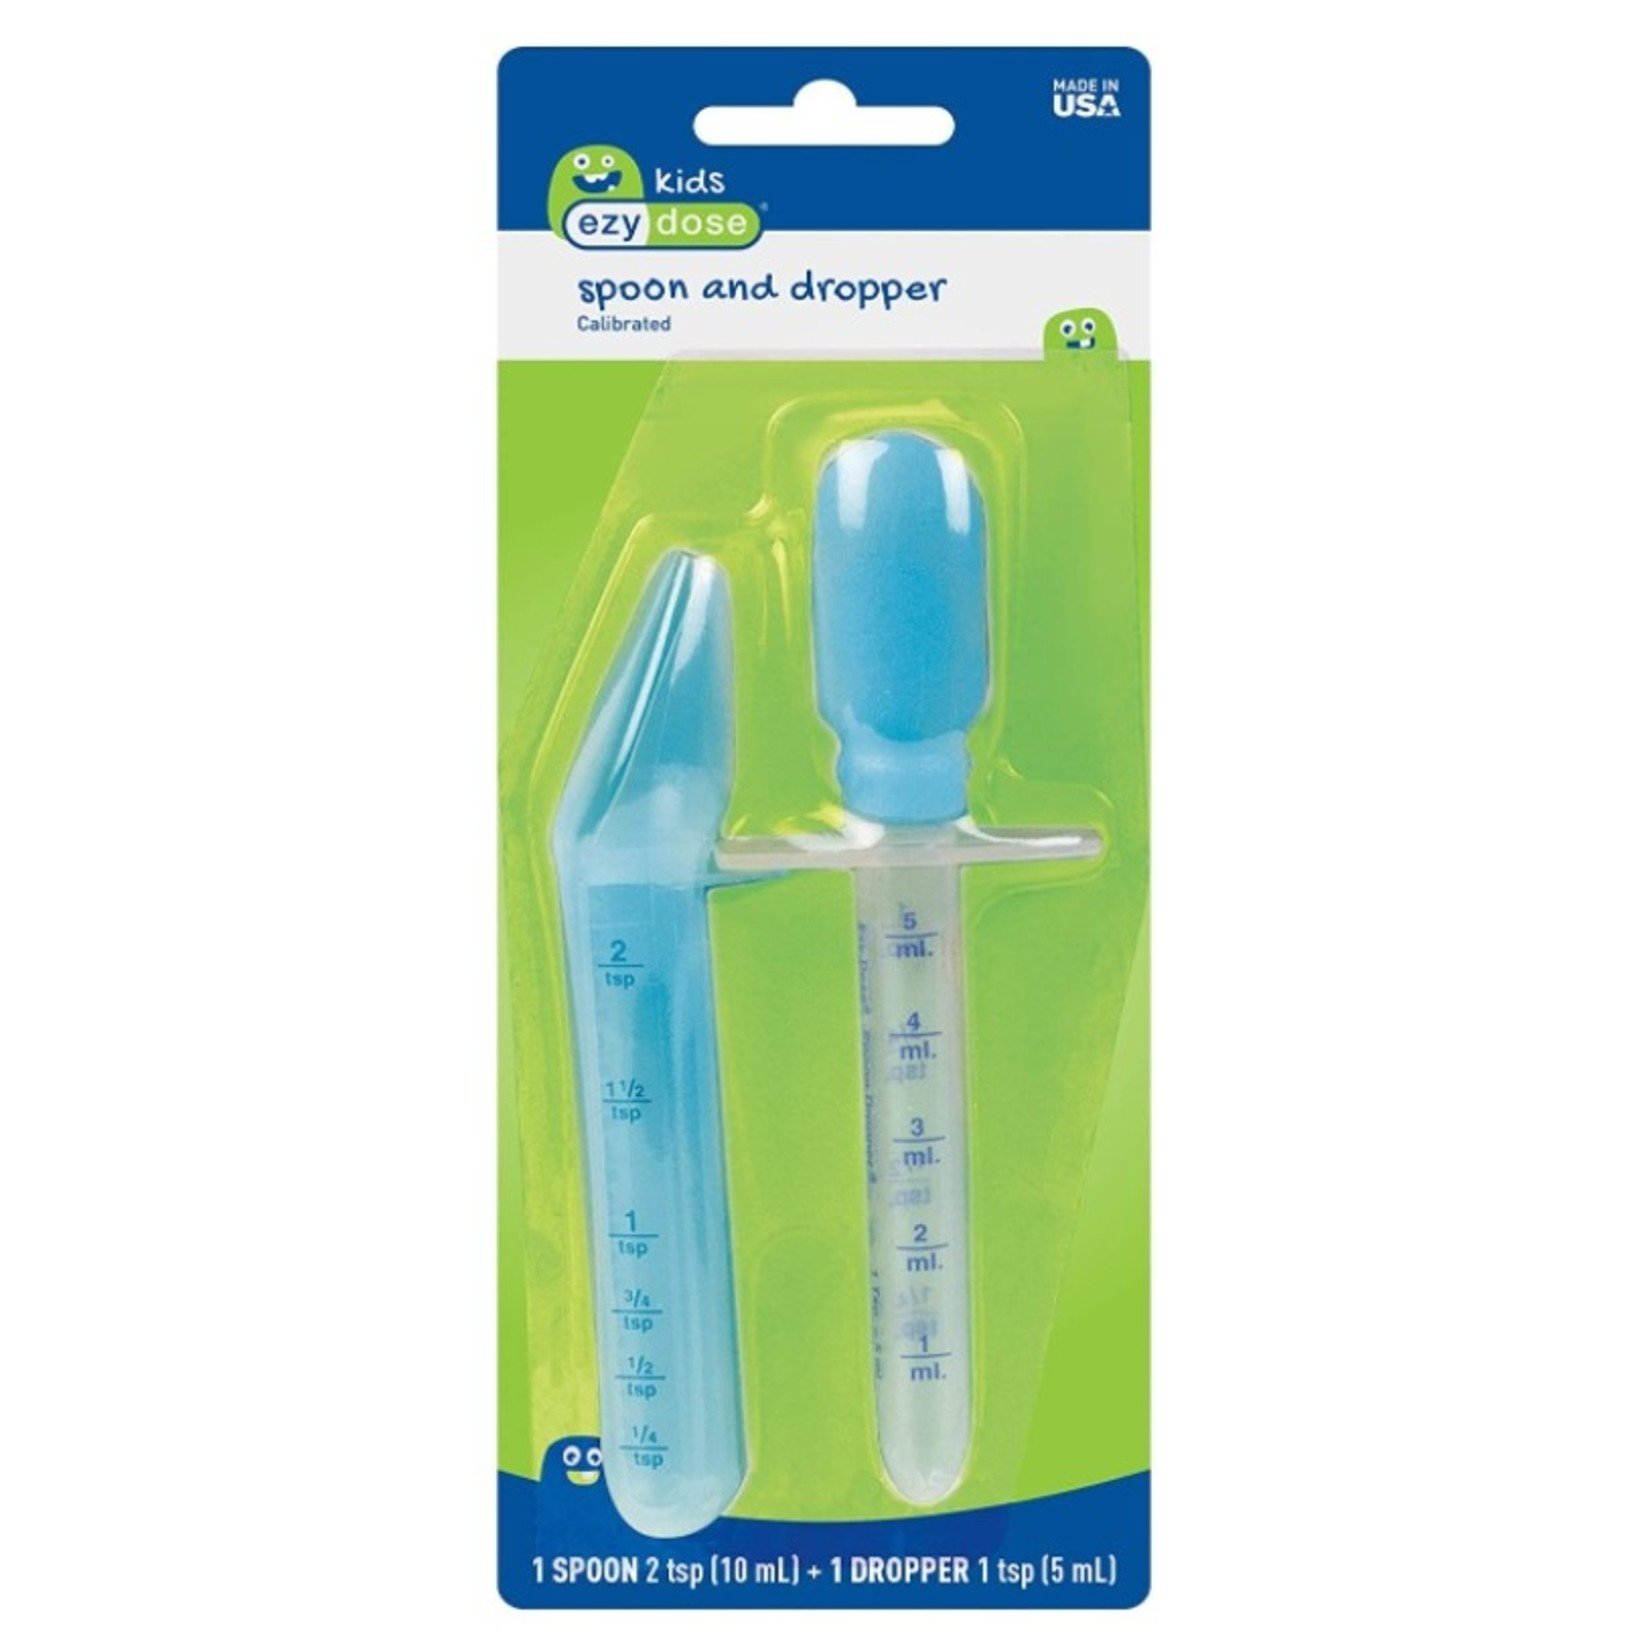 ezy dose kids Spoon and Dropper